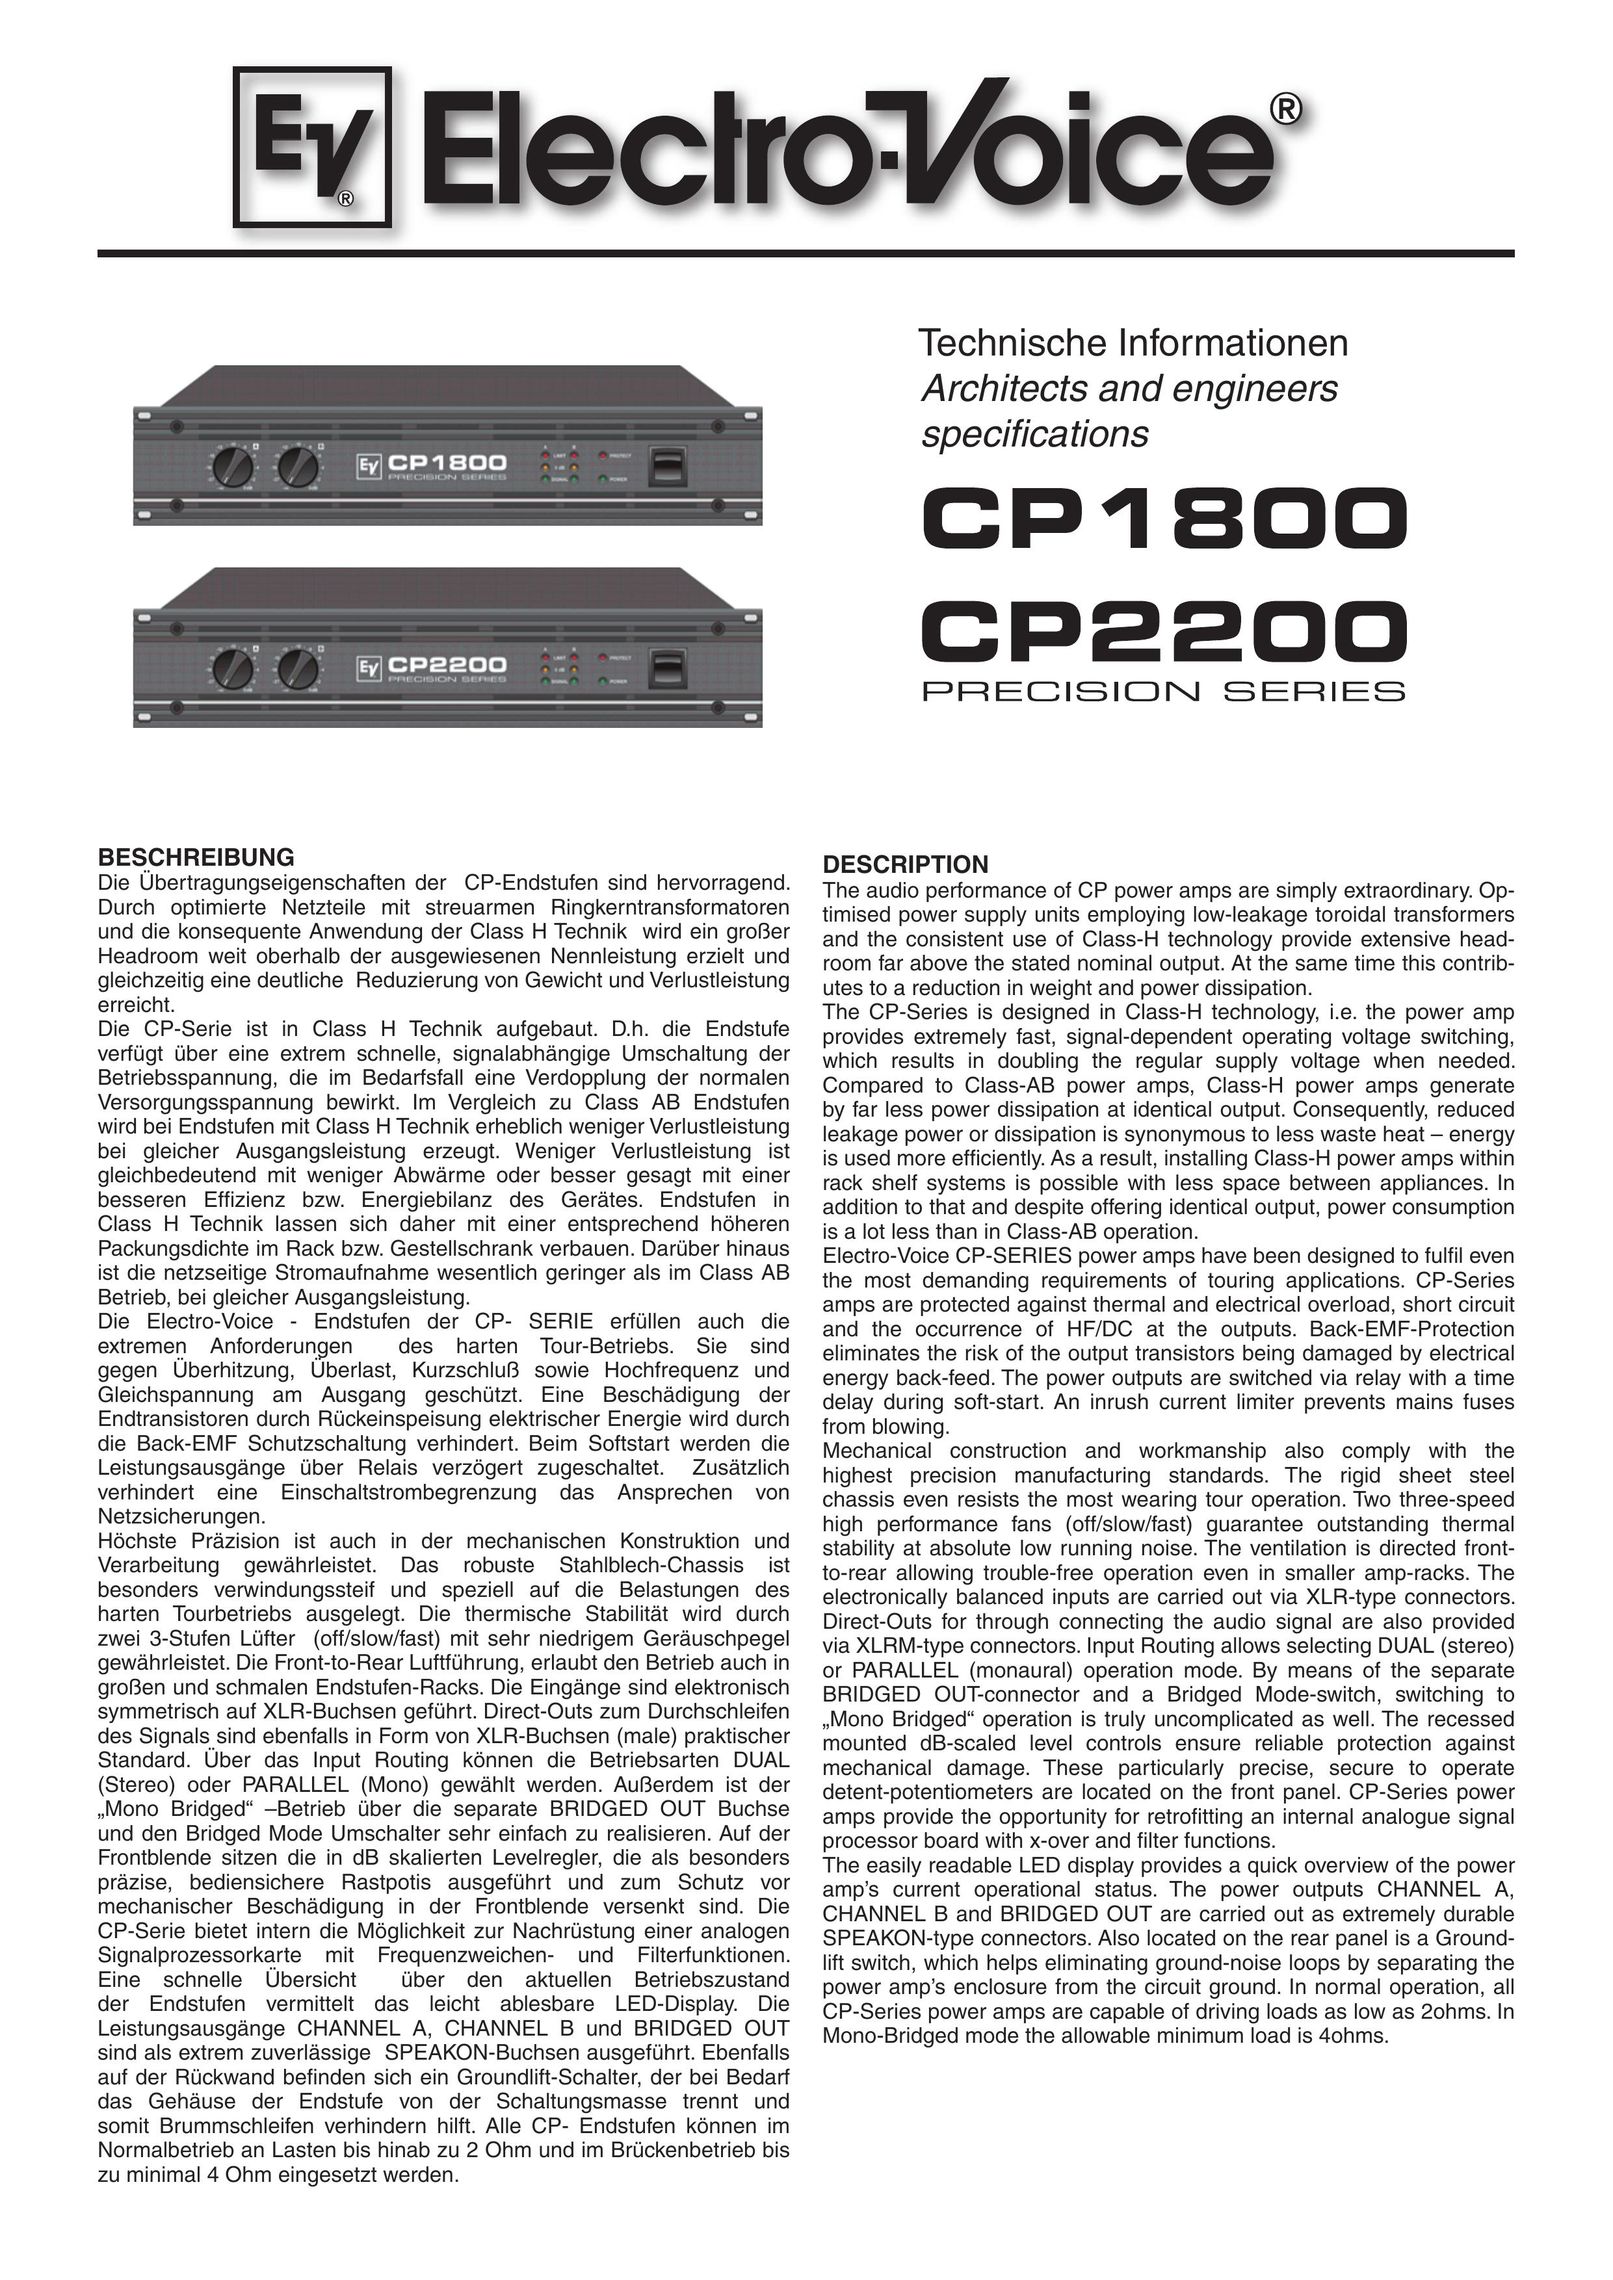 Electro-Voice CP1800 Stereo Amplifier User Manual